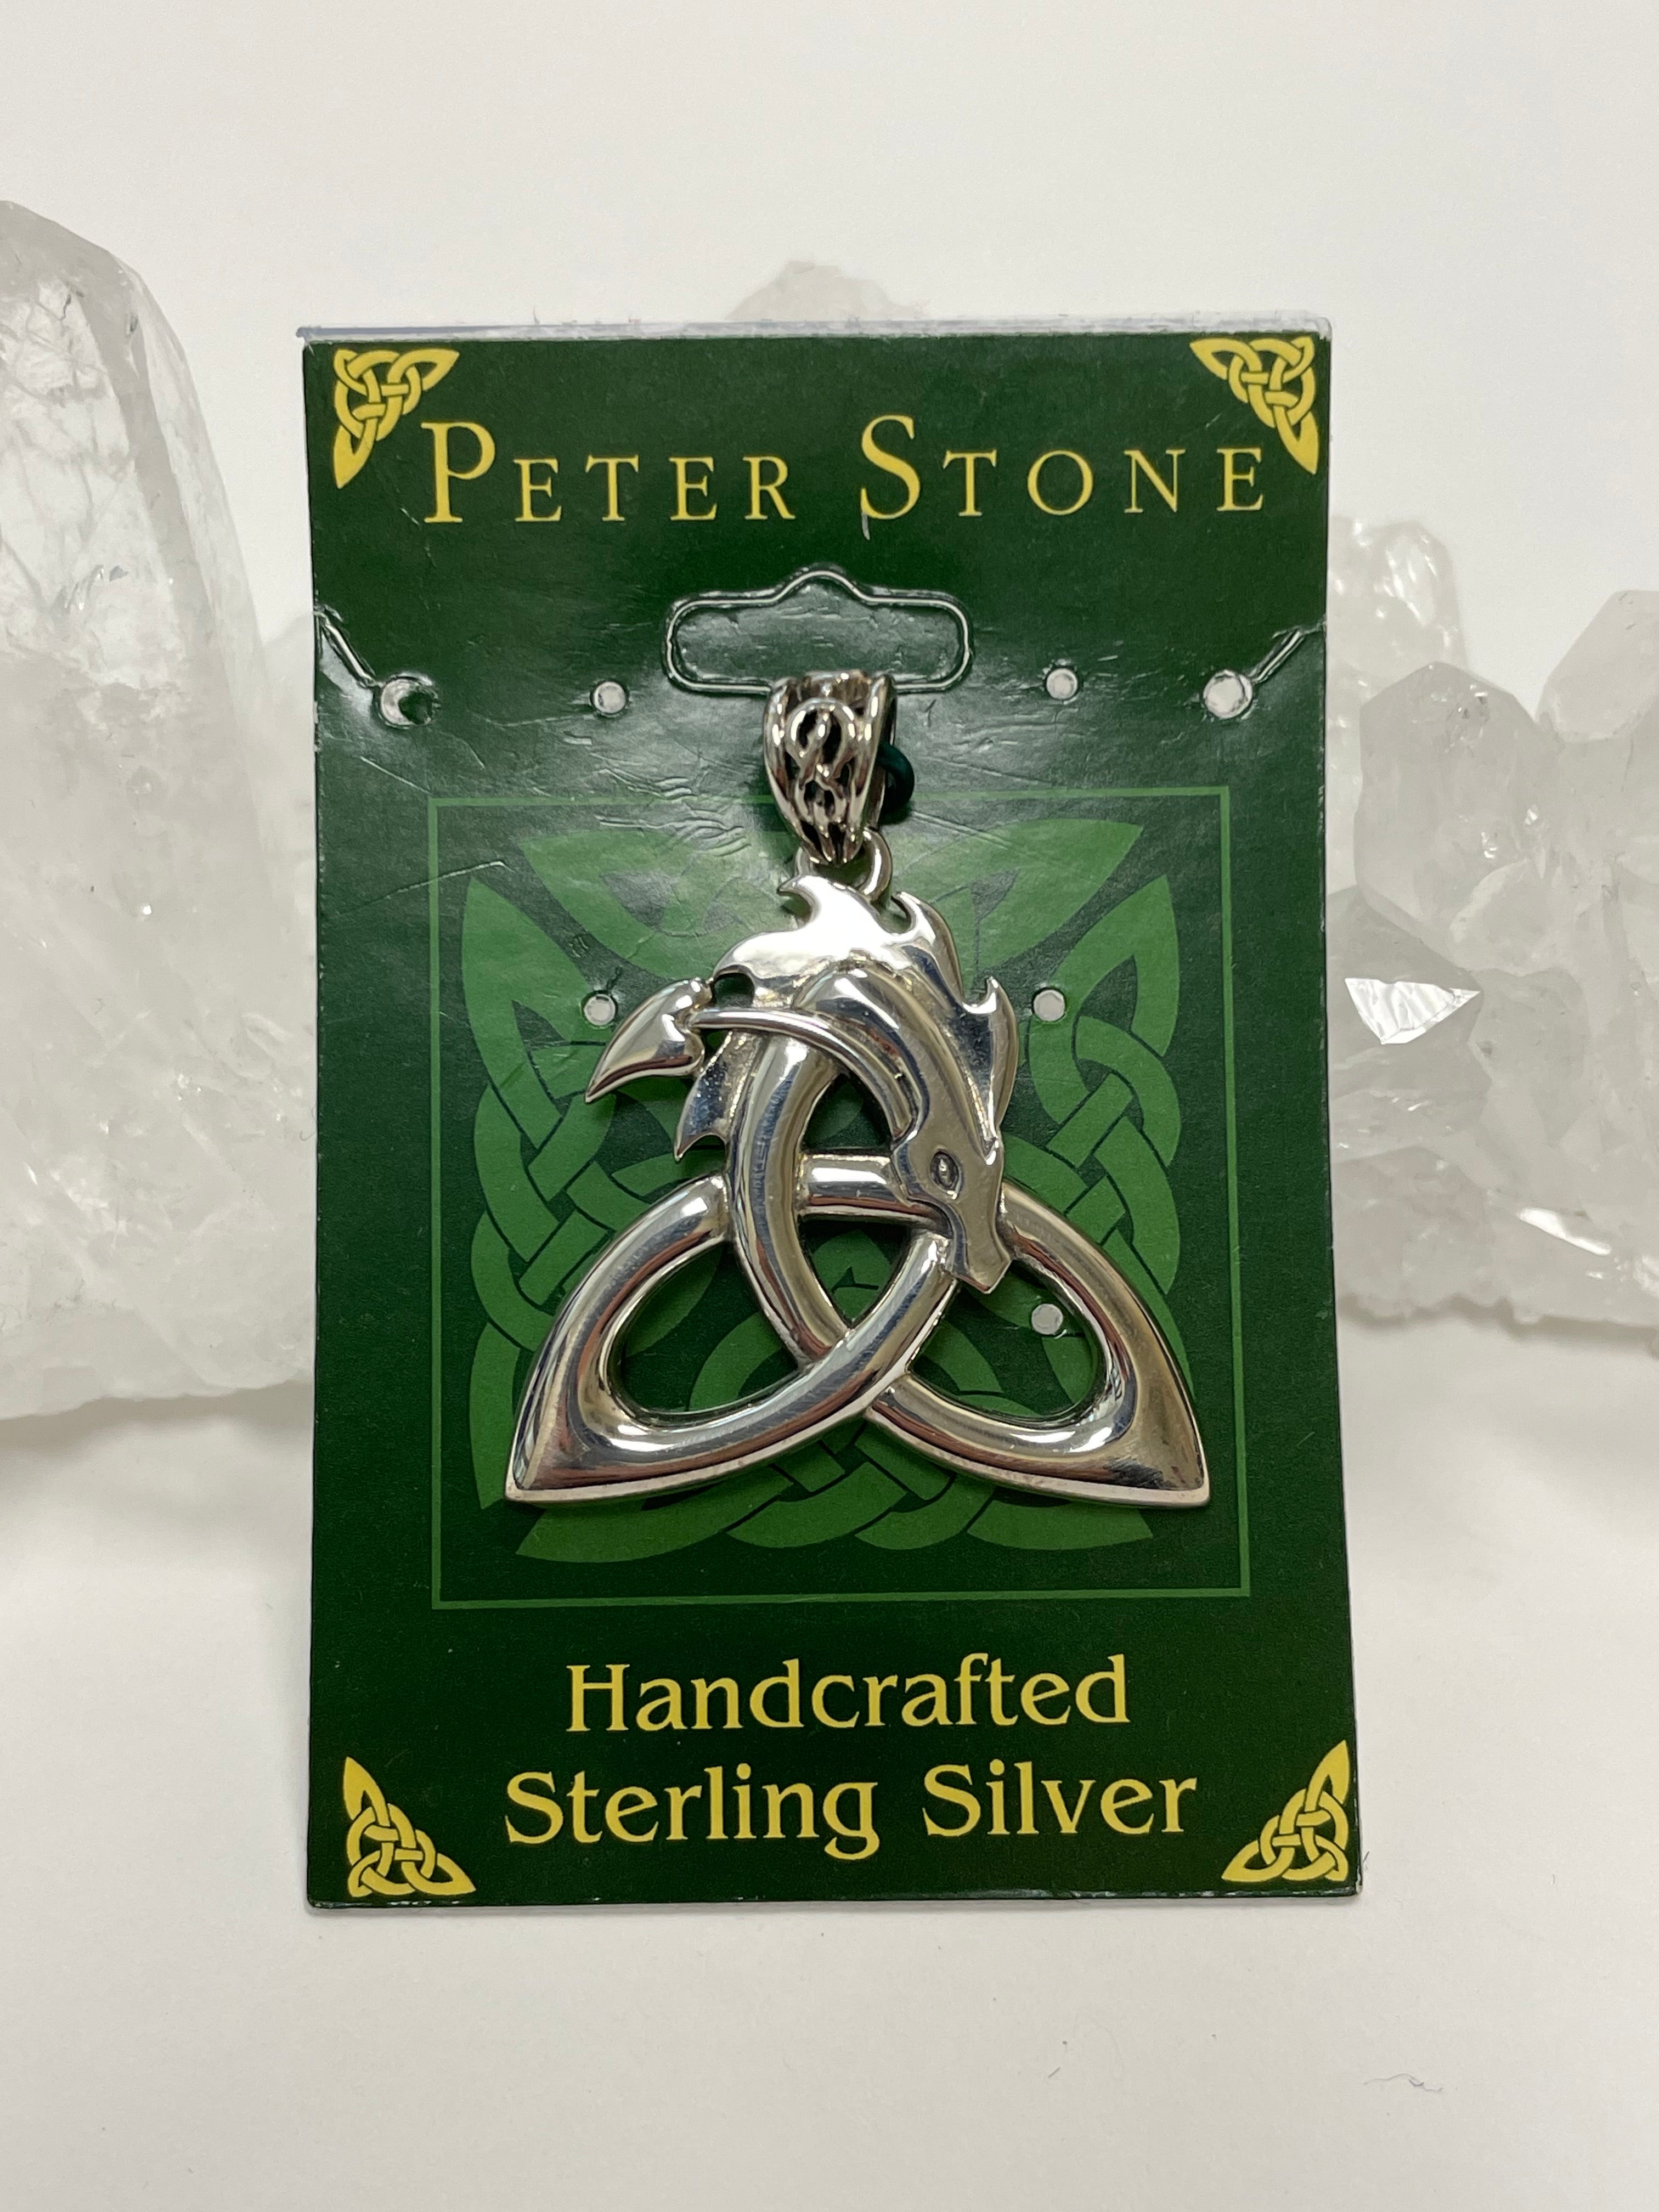 Yet another view of the stunning sterling silver dragon pendant forming a Celtic triquetra or trinity knot with a Celtic design on the bail. Approximately 1¼" without bail, 1½" with bail. Cost is $34.98.